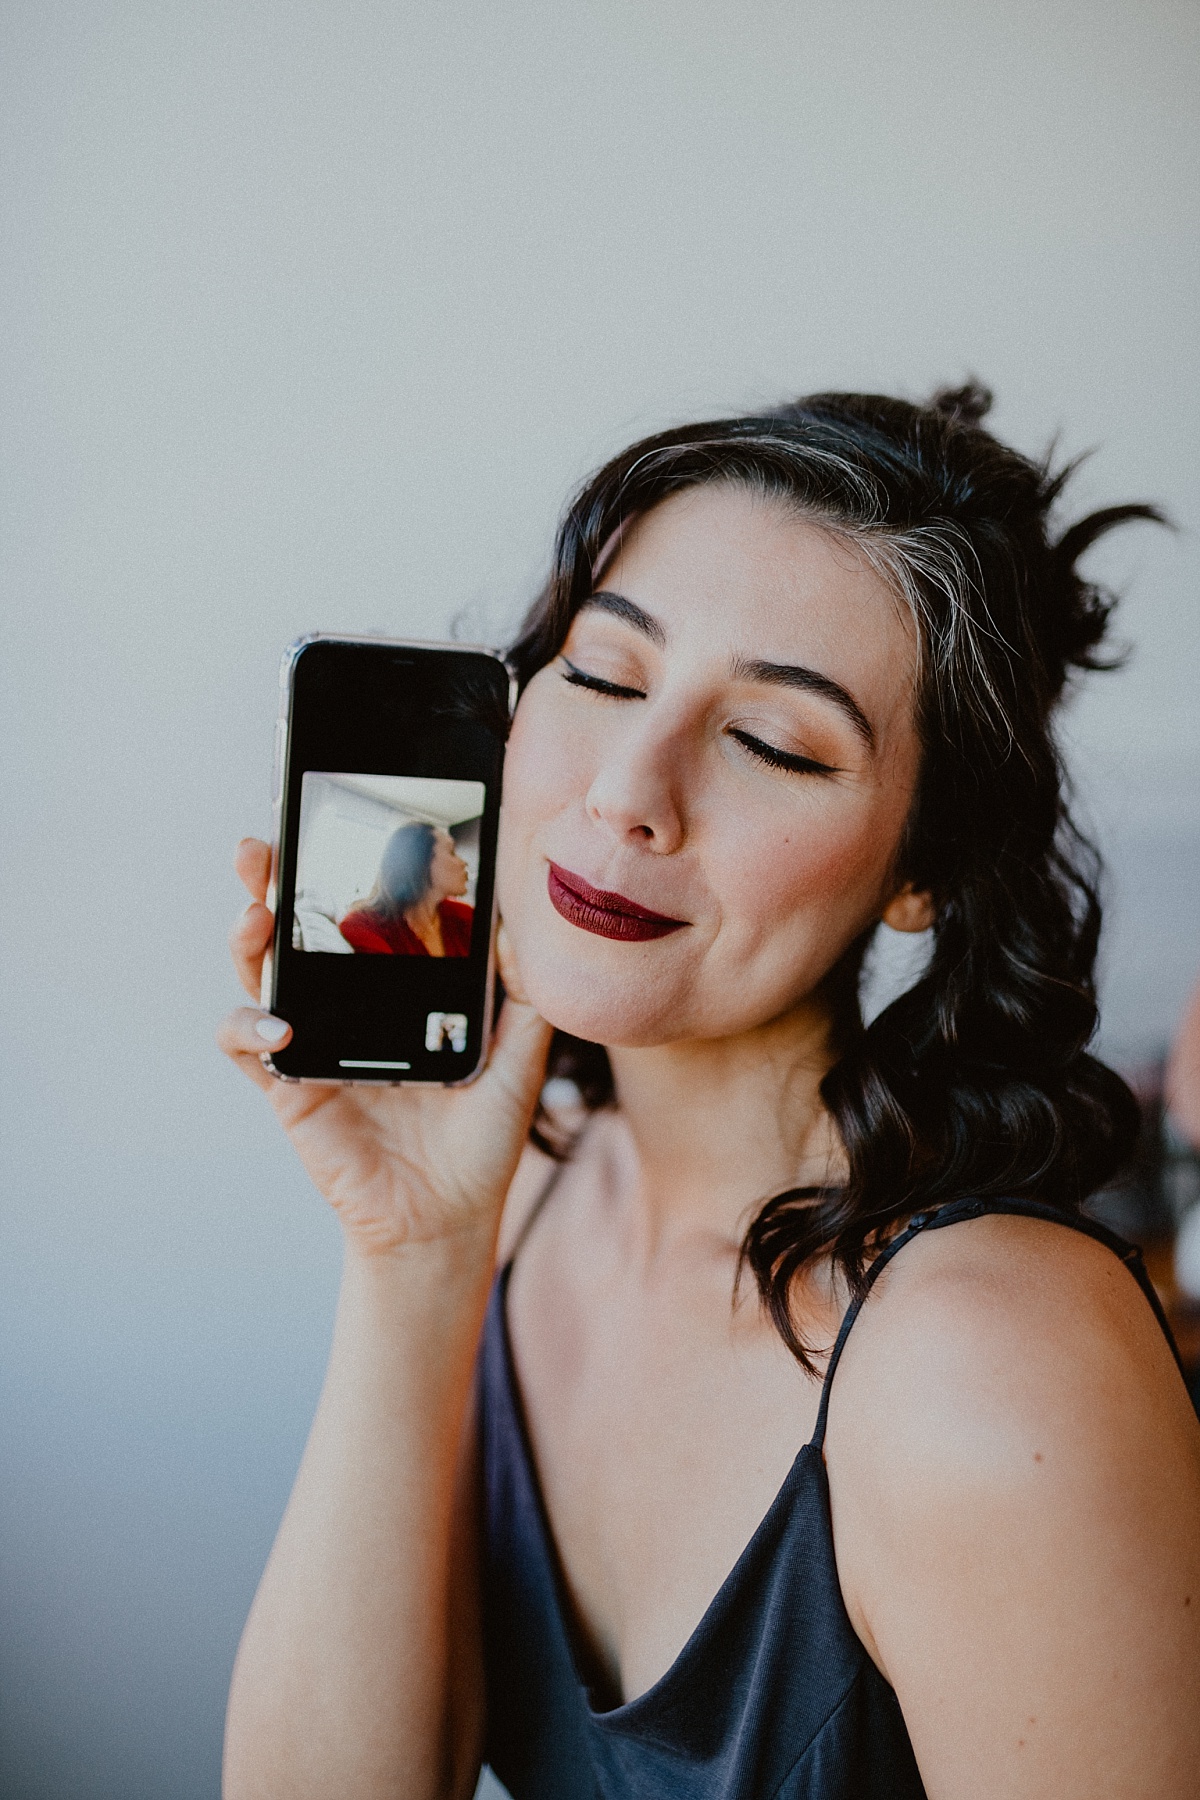 A beautiful bride FaceTimes her friend while getting ready for her elopement during the pademic